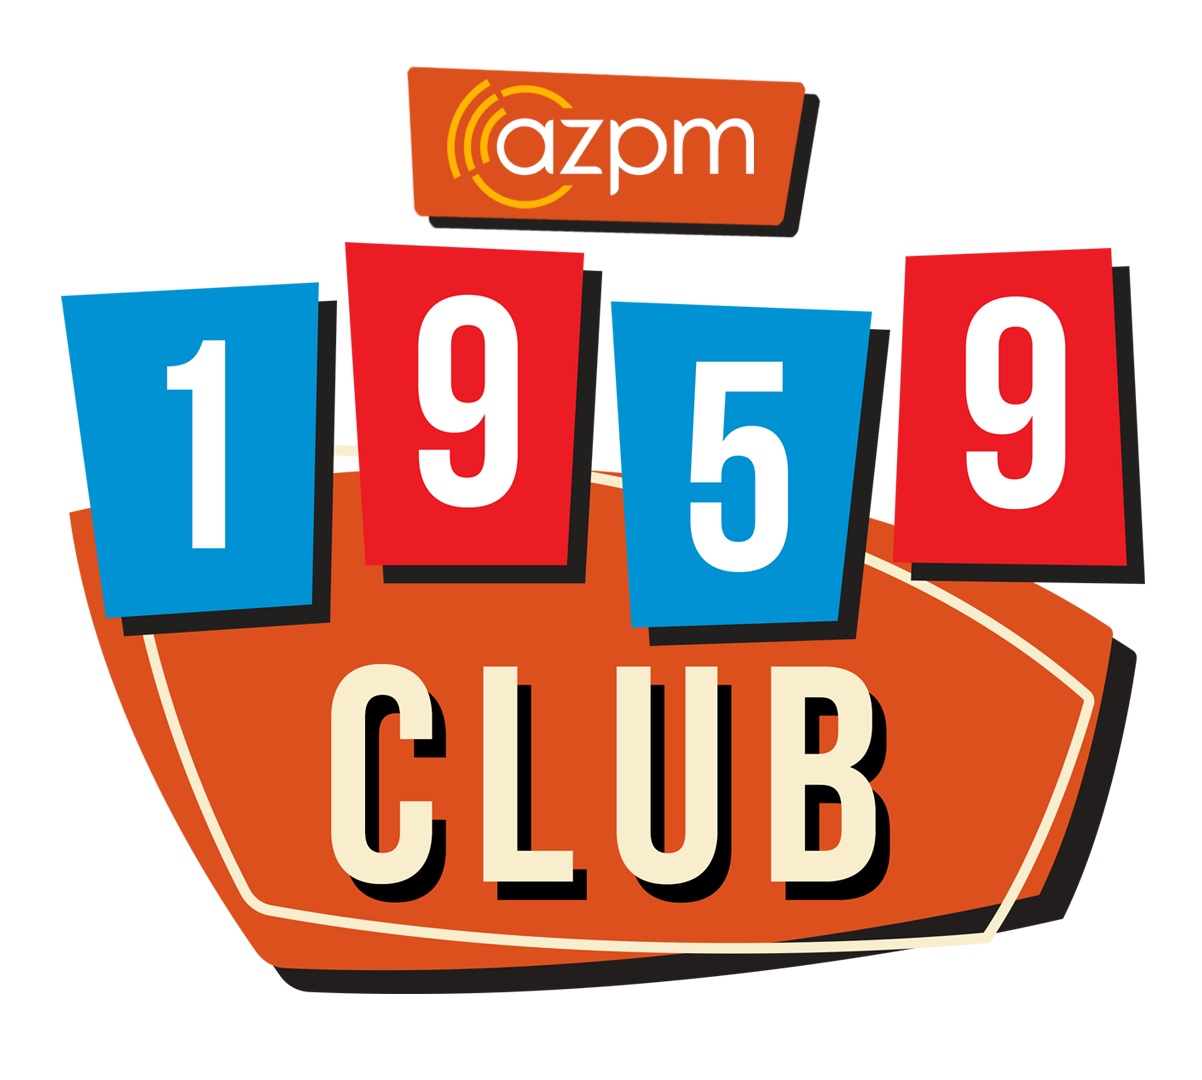 Join the 1959 Club